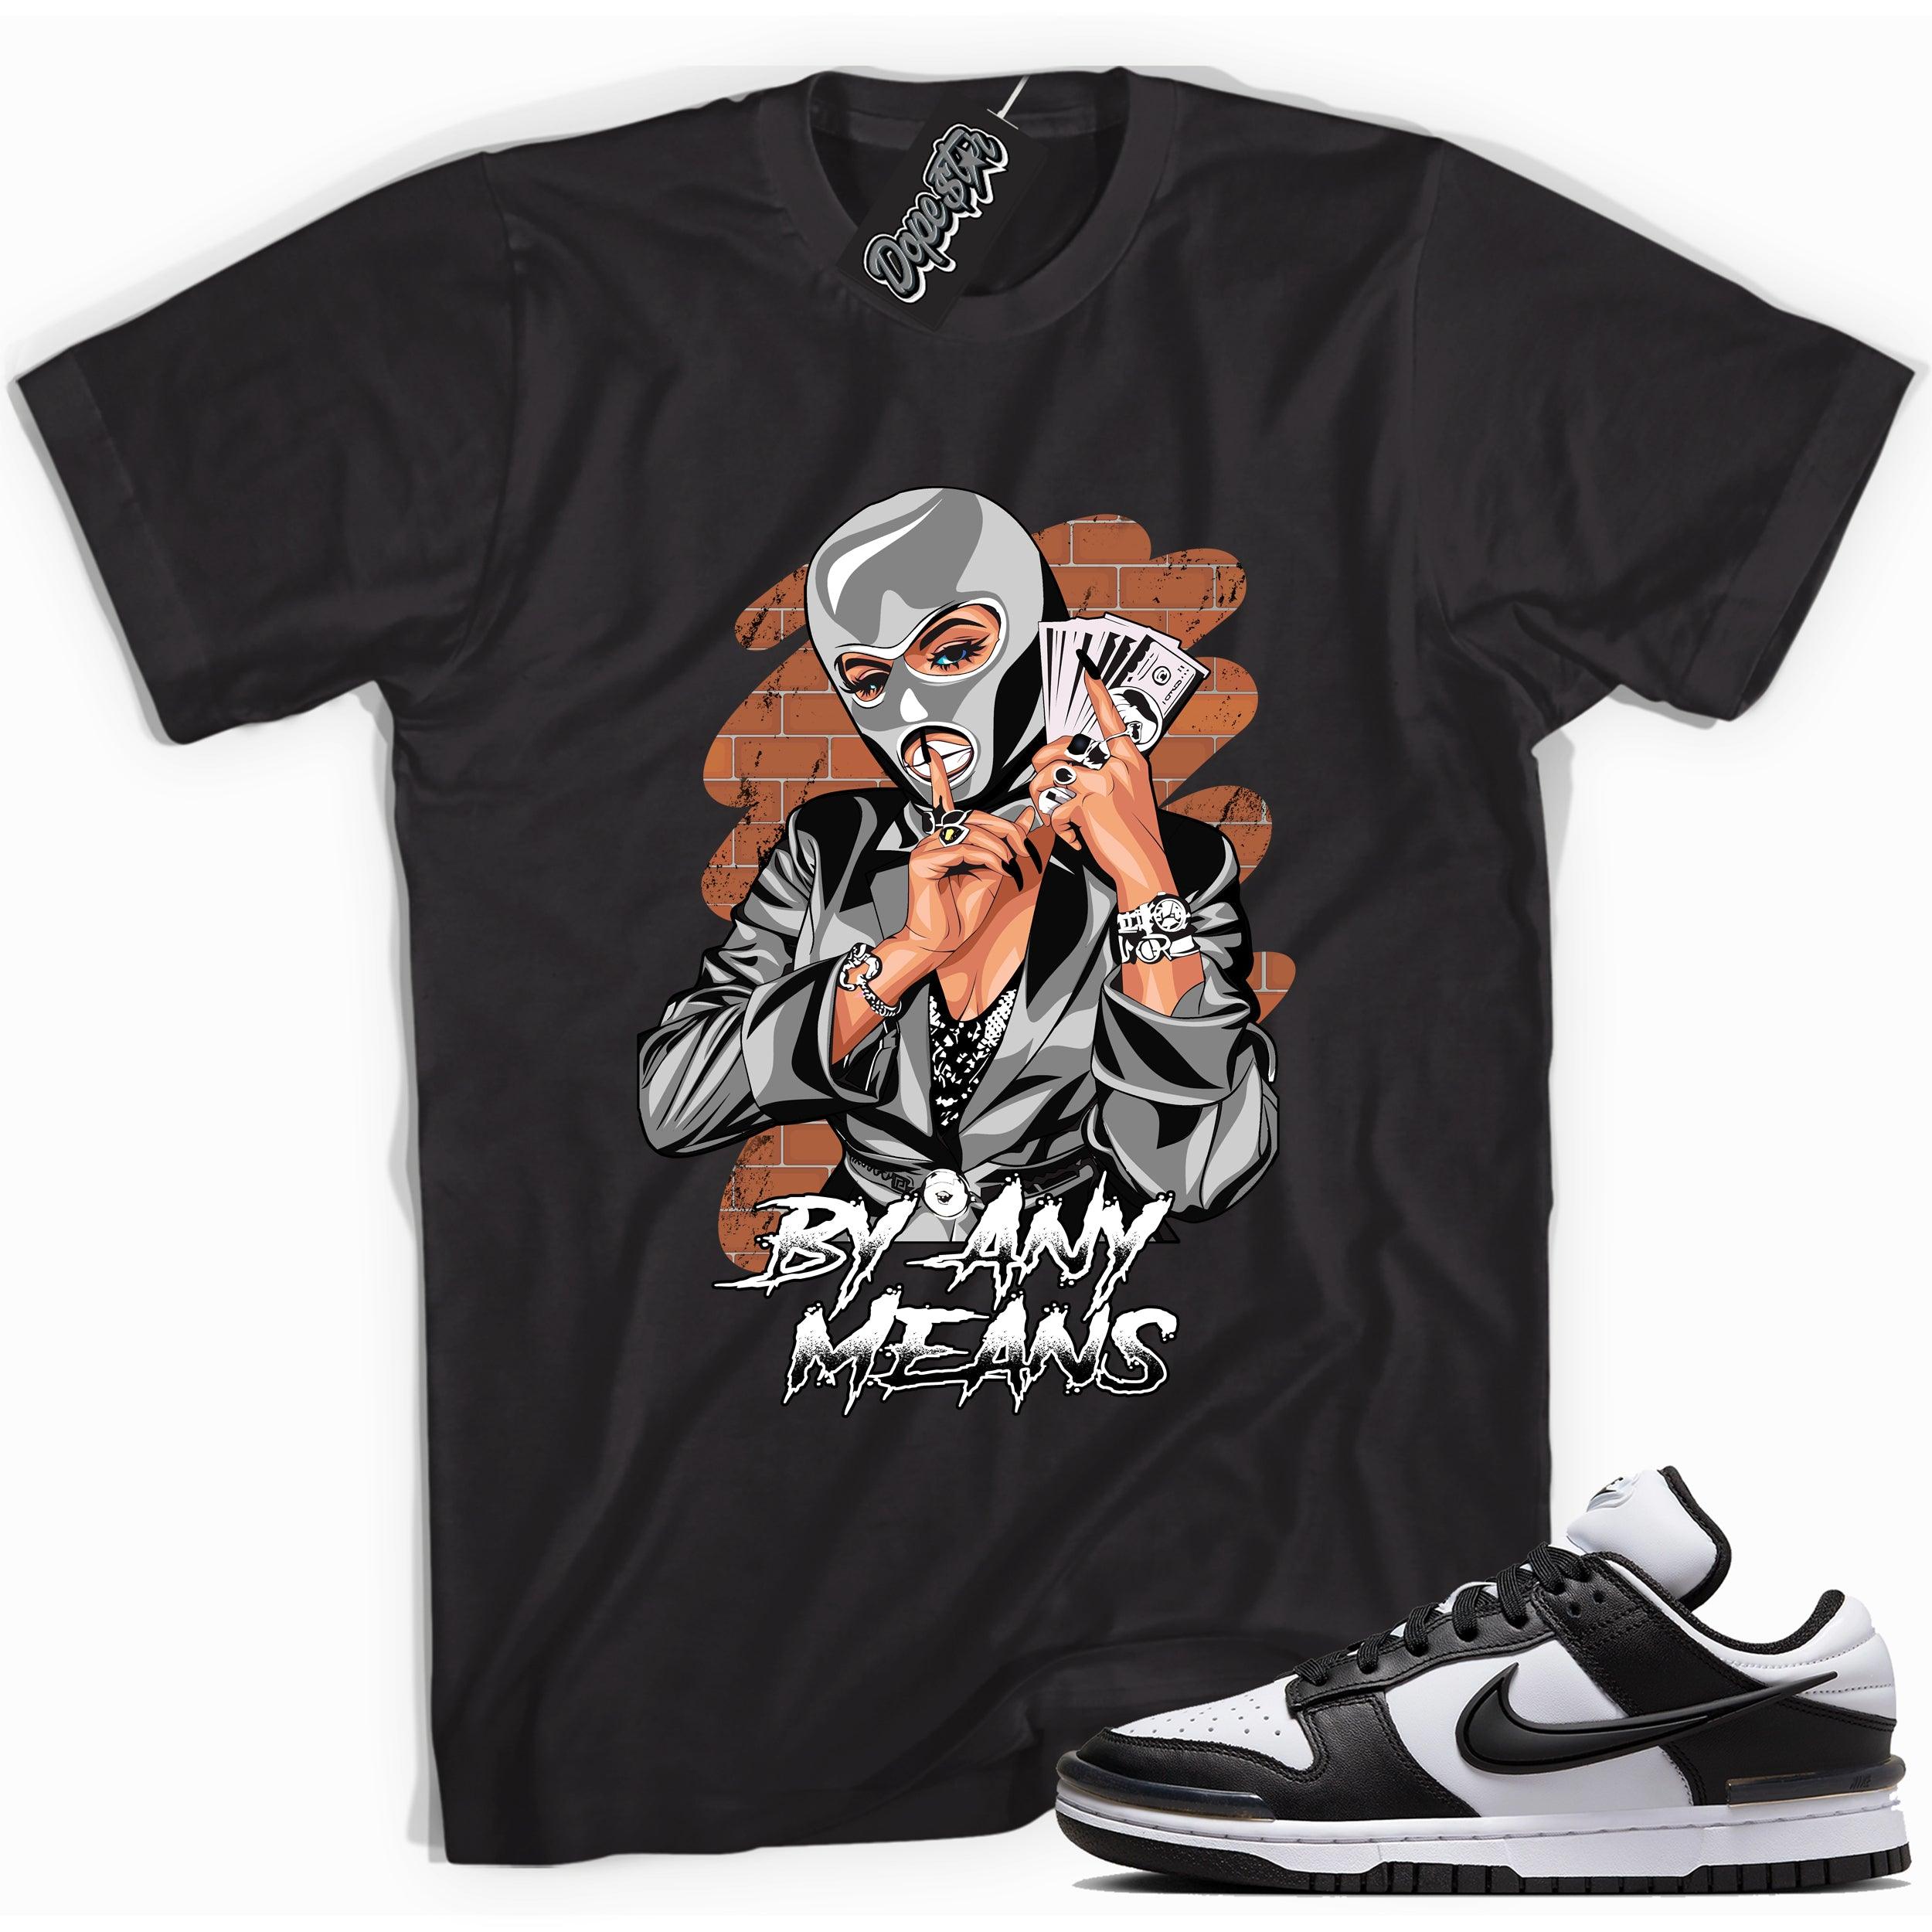 Cool black graphic tee with 'by any means' print, that perfectly matches Nike Dunk Low Twist Panda sneakers.